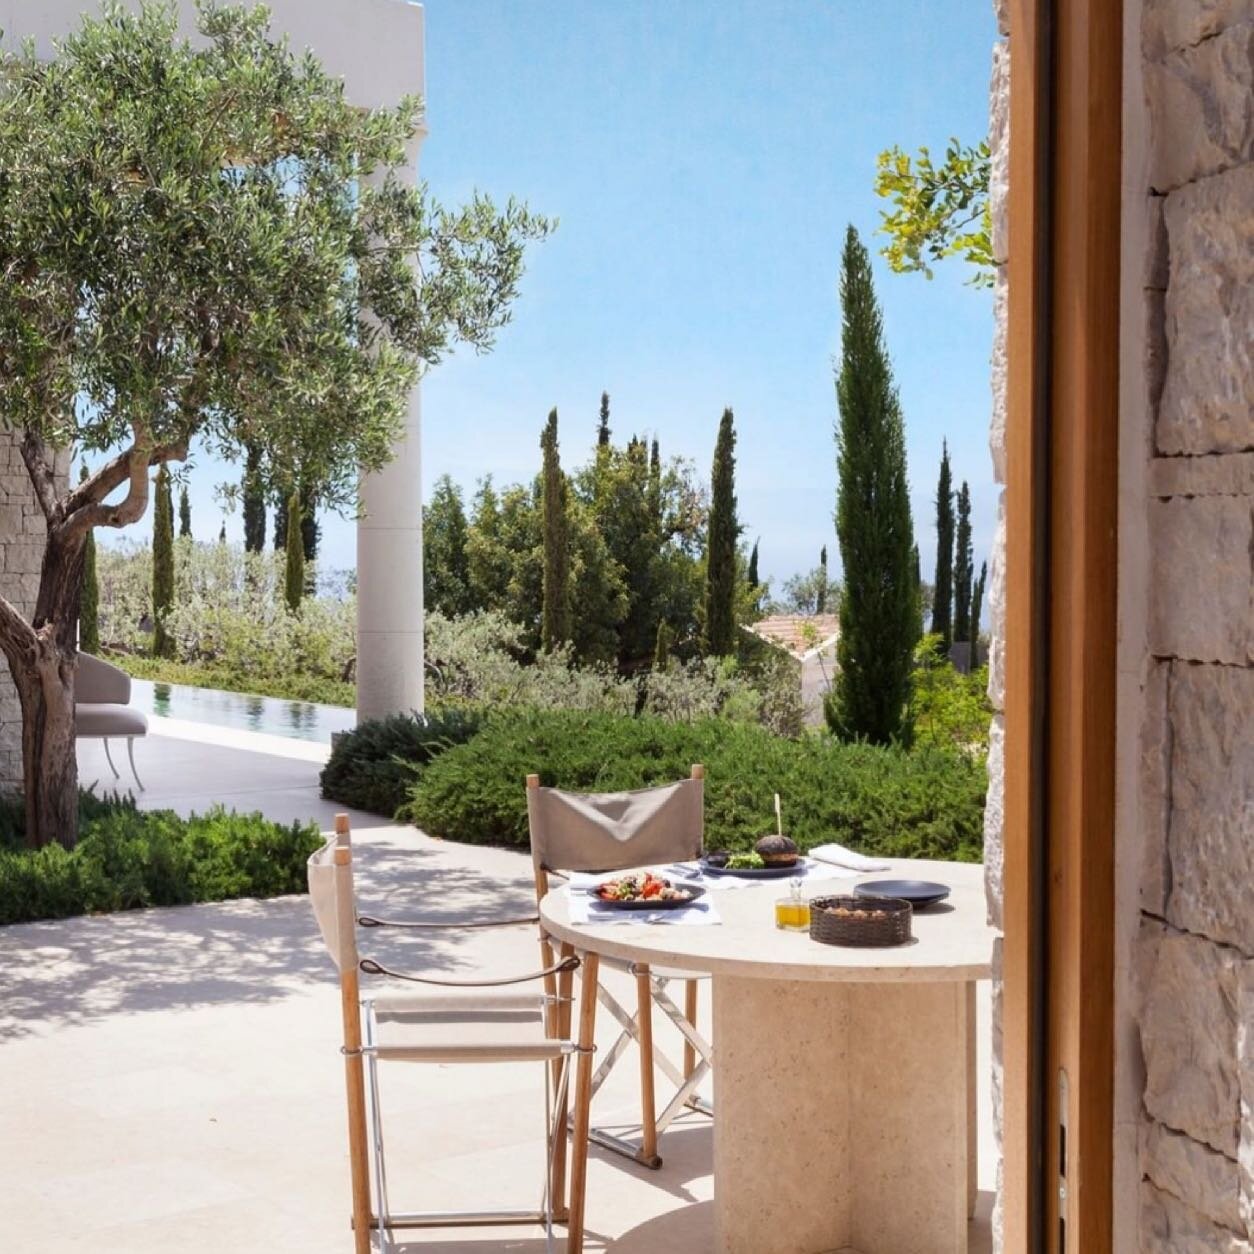 File this under where we wish were this Wednesday ☀️ #travelwithus #greece #daydreaming 

📷 @amanzoe